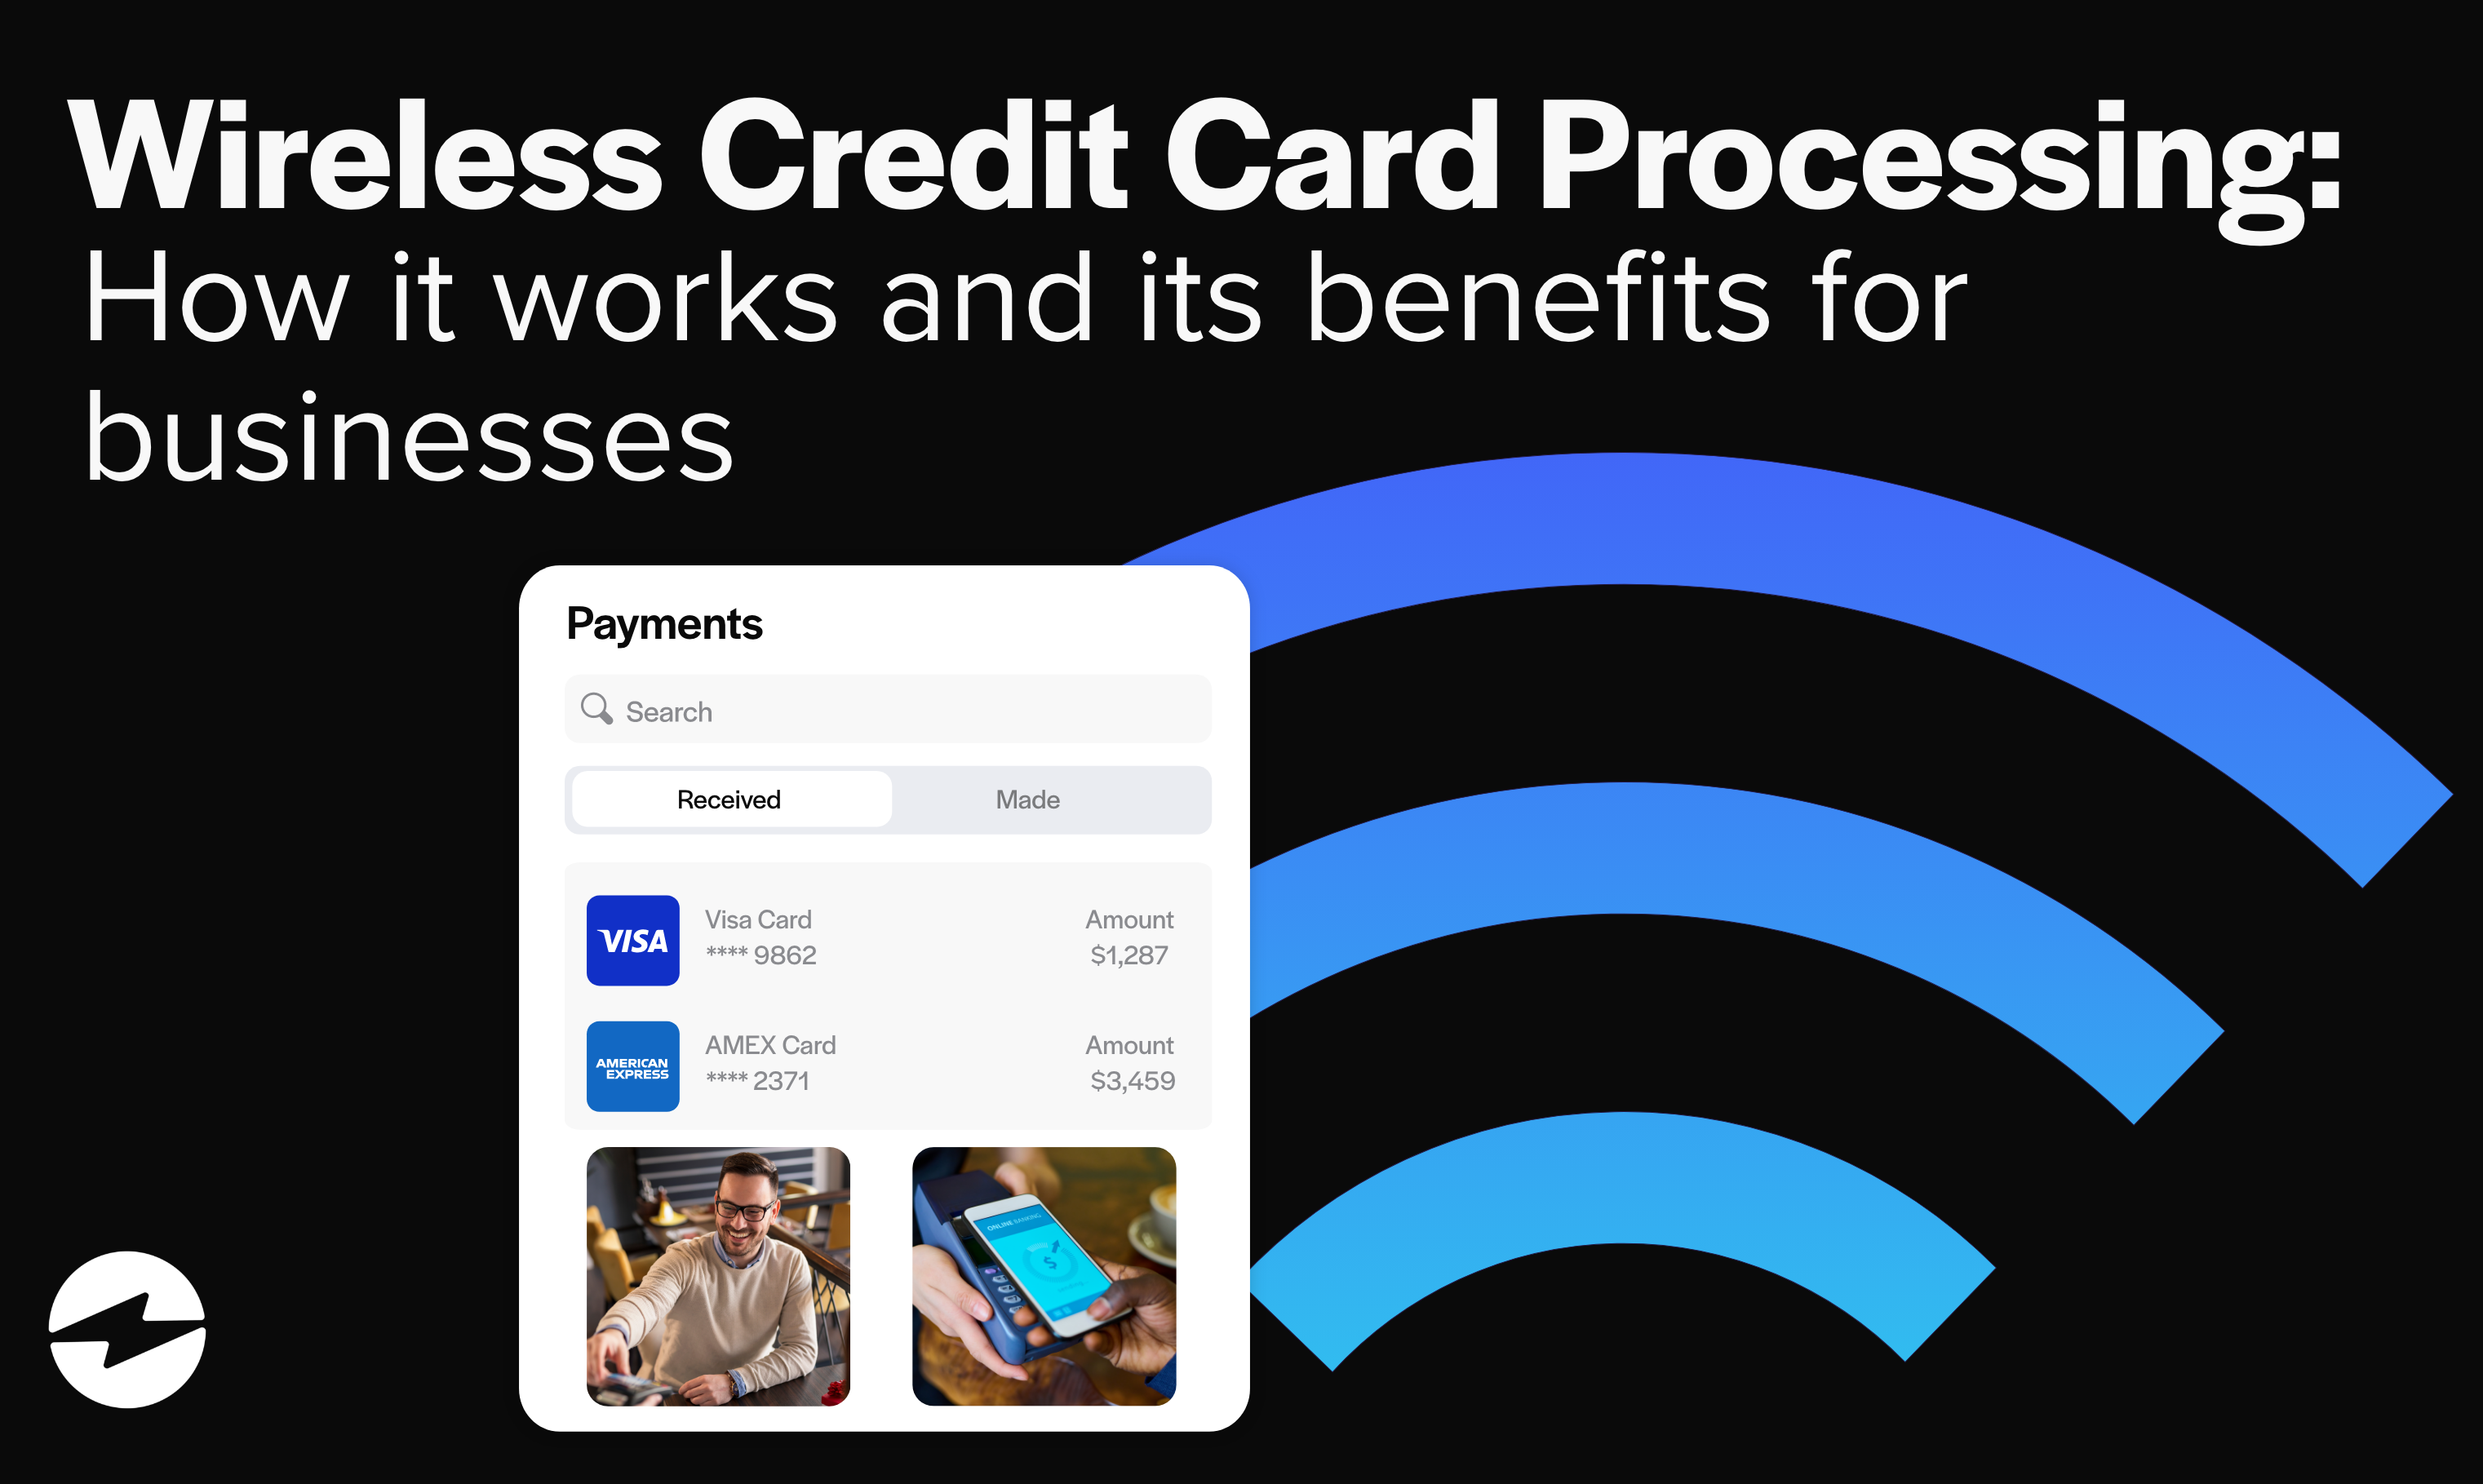 Wireless Credit Card Processing: How It Works and Its Benefits for Businesses